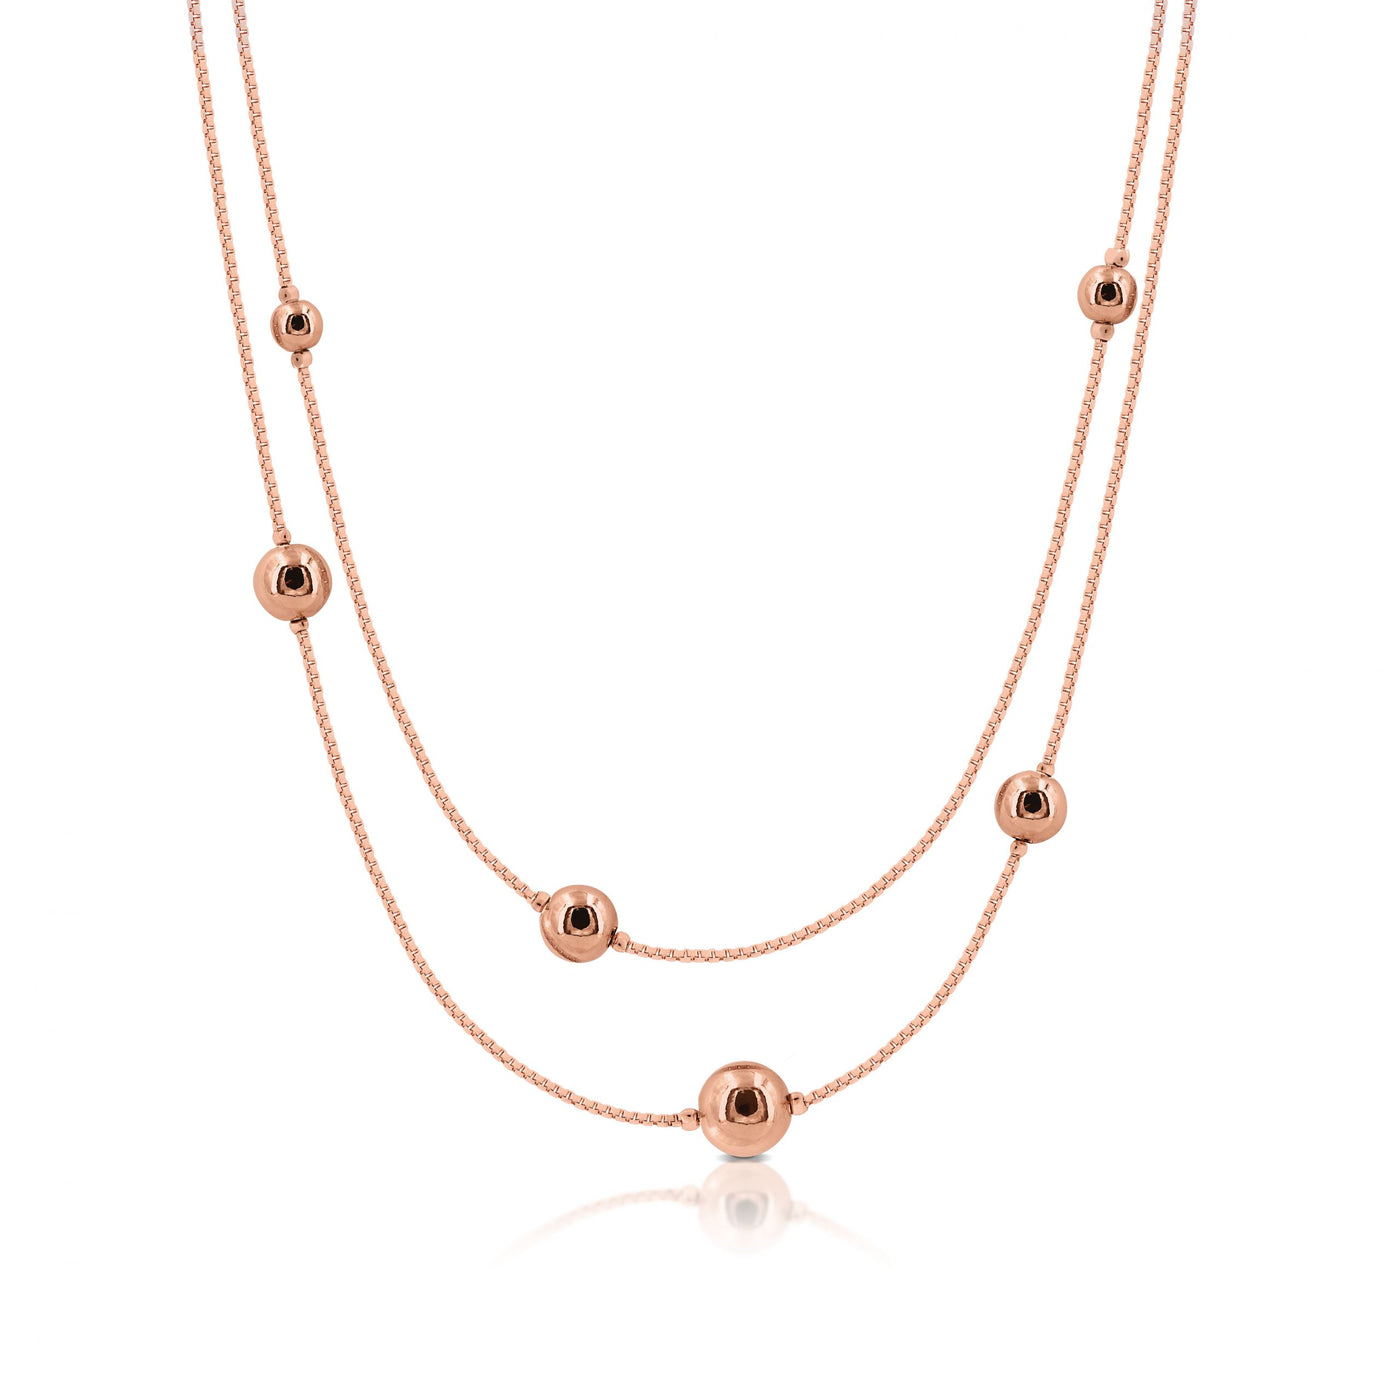 Romi Necklace - Multi Bead Double Length - Rose Gold Plated/Silver